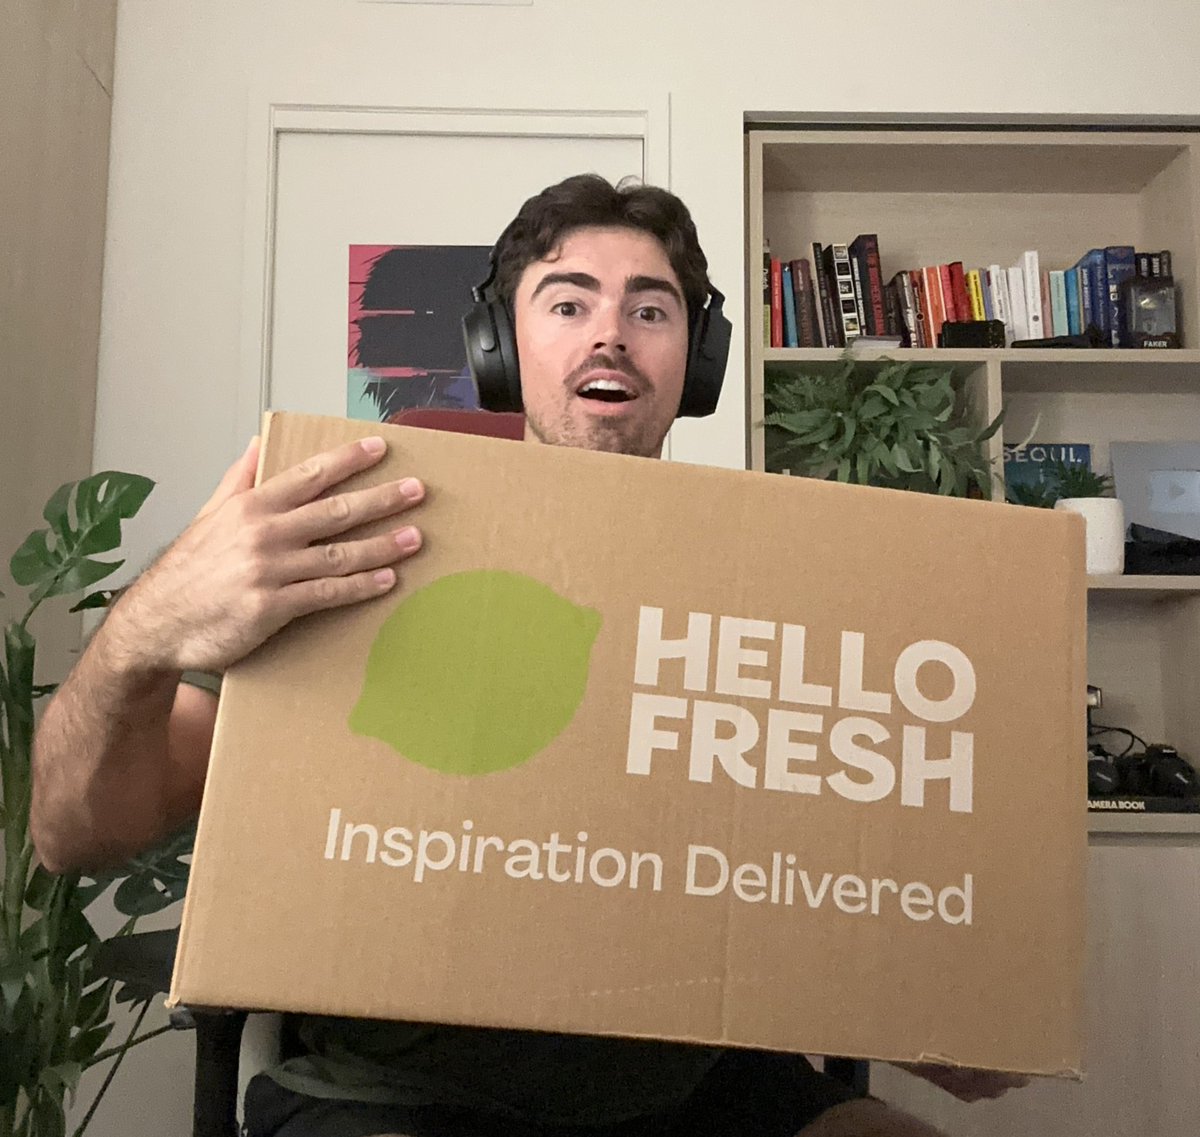 ITS SO BIG Today’s stream sponsored by @HelloFreshAU Use my link or go to HelloFresh.com.au and use CODE: GSQAUMIDBNOV200 to get up to $200 off! CLICK HERE - bit.ly/3uy0S6R twitch.tv/midbeast